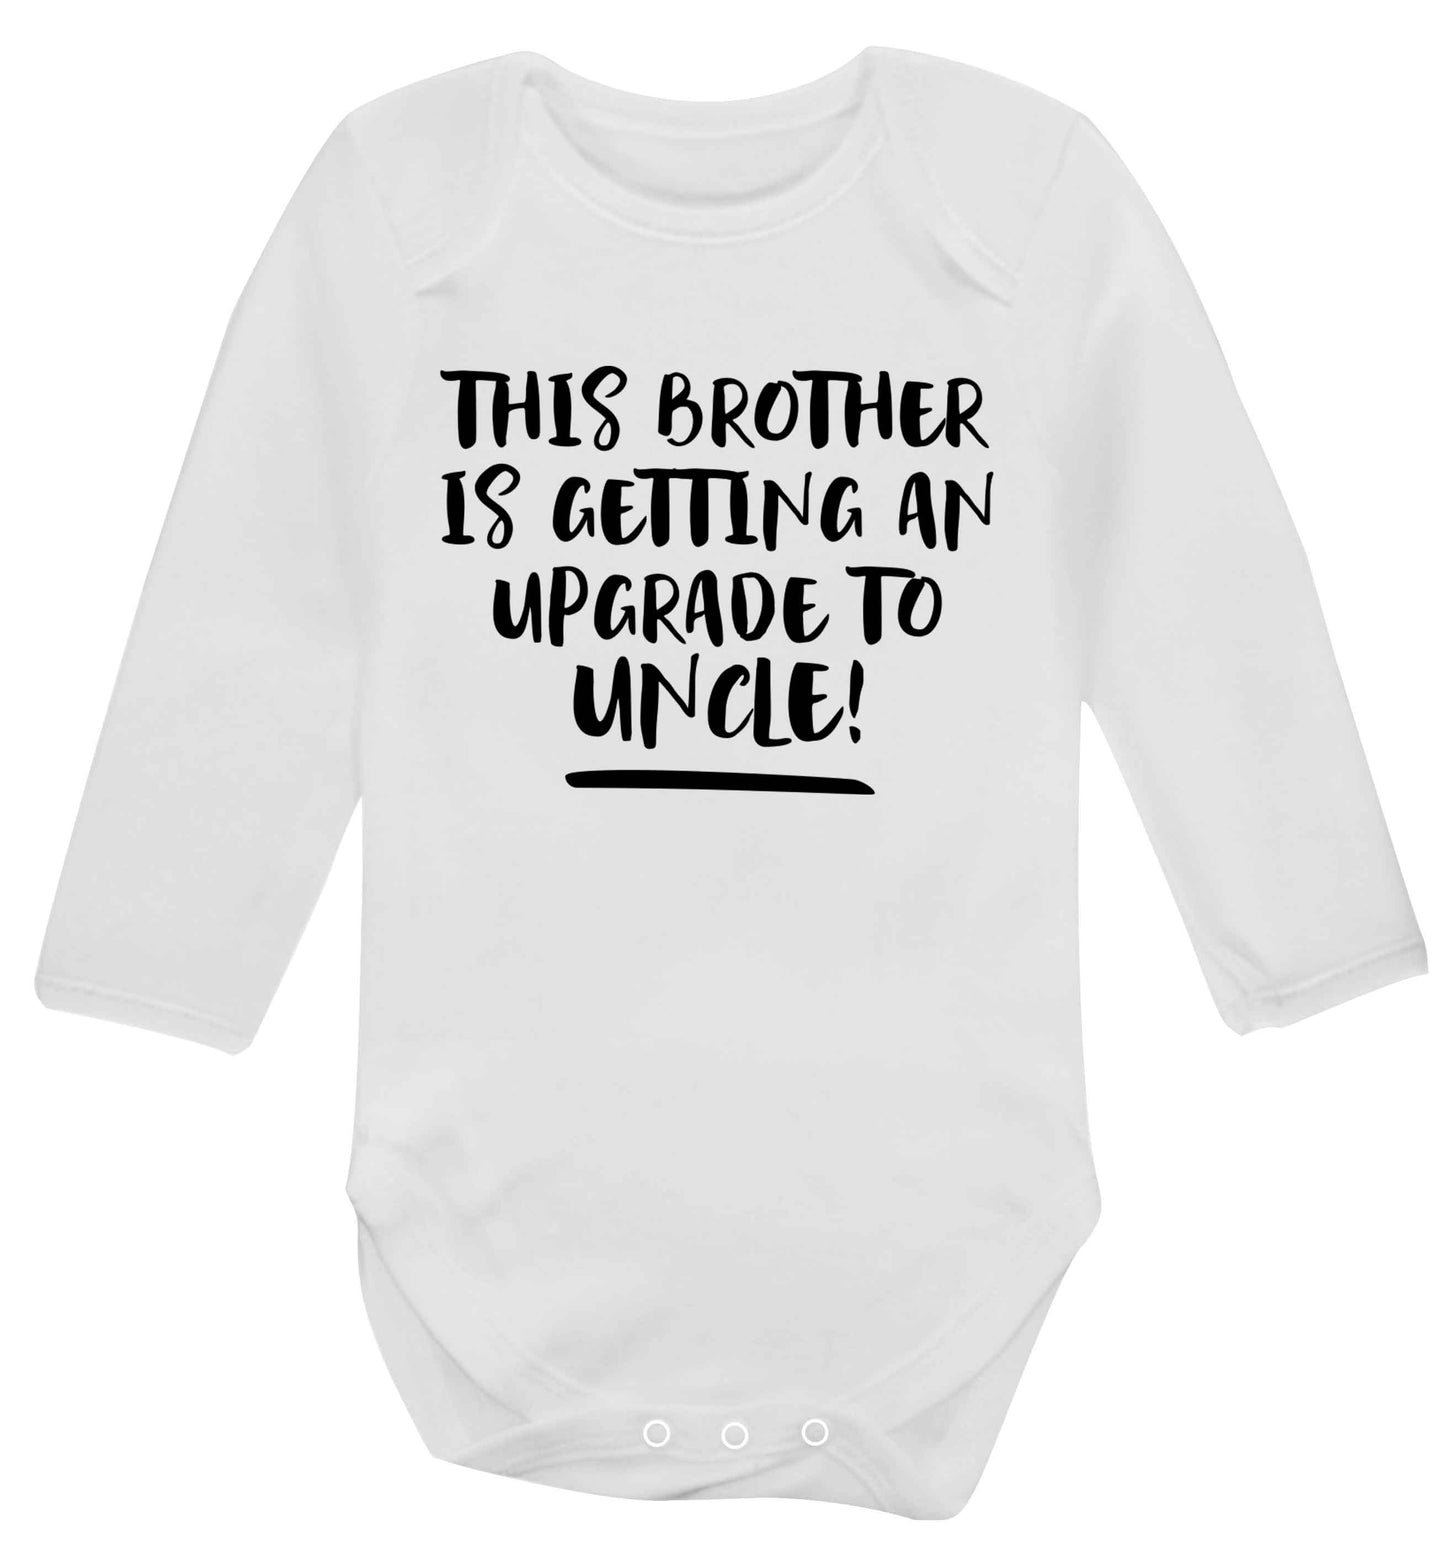 This brother is getting an upgrade to uncle! Baby Vest long sleeved white 6-12 months